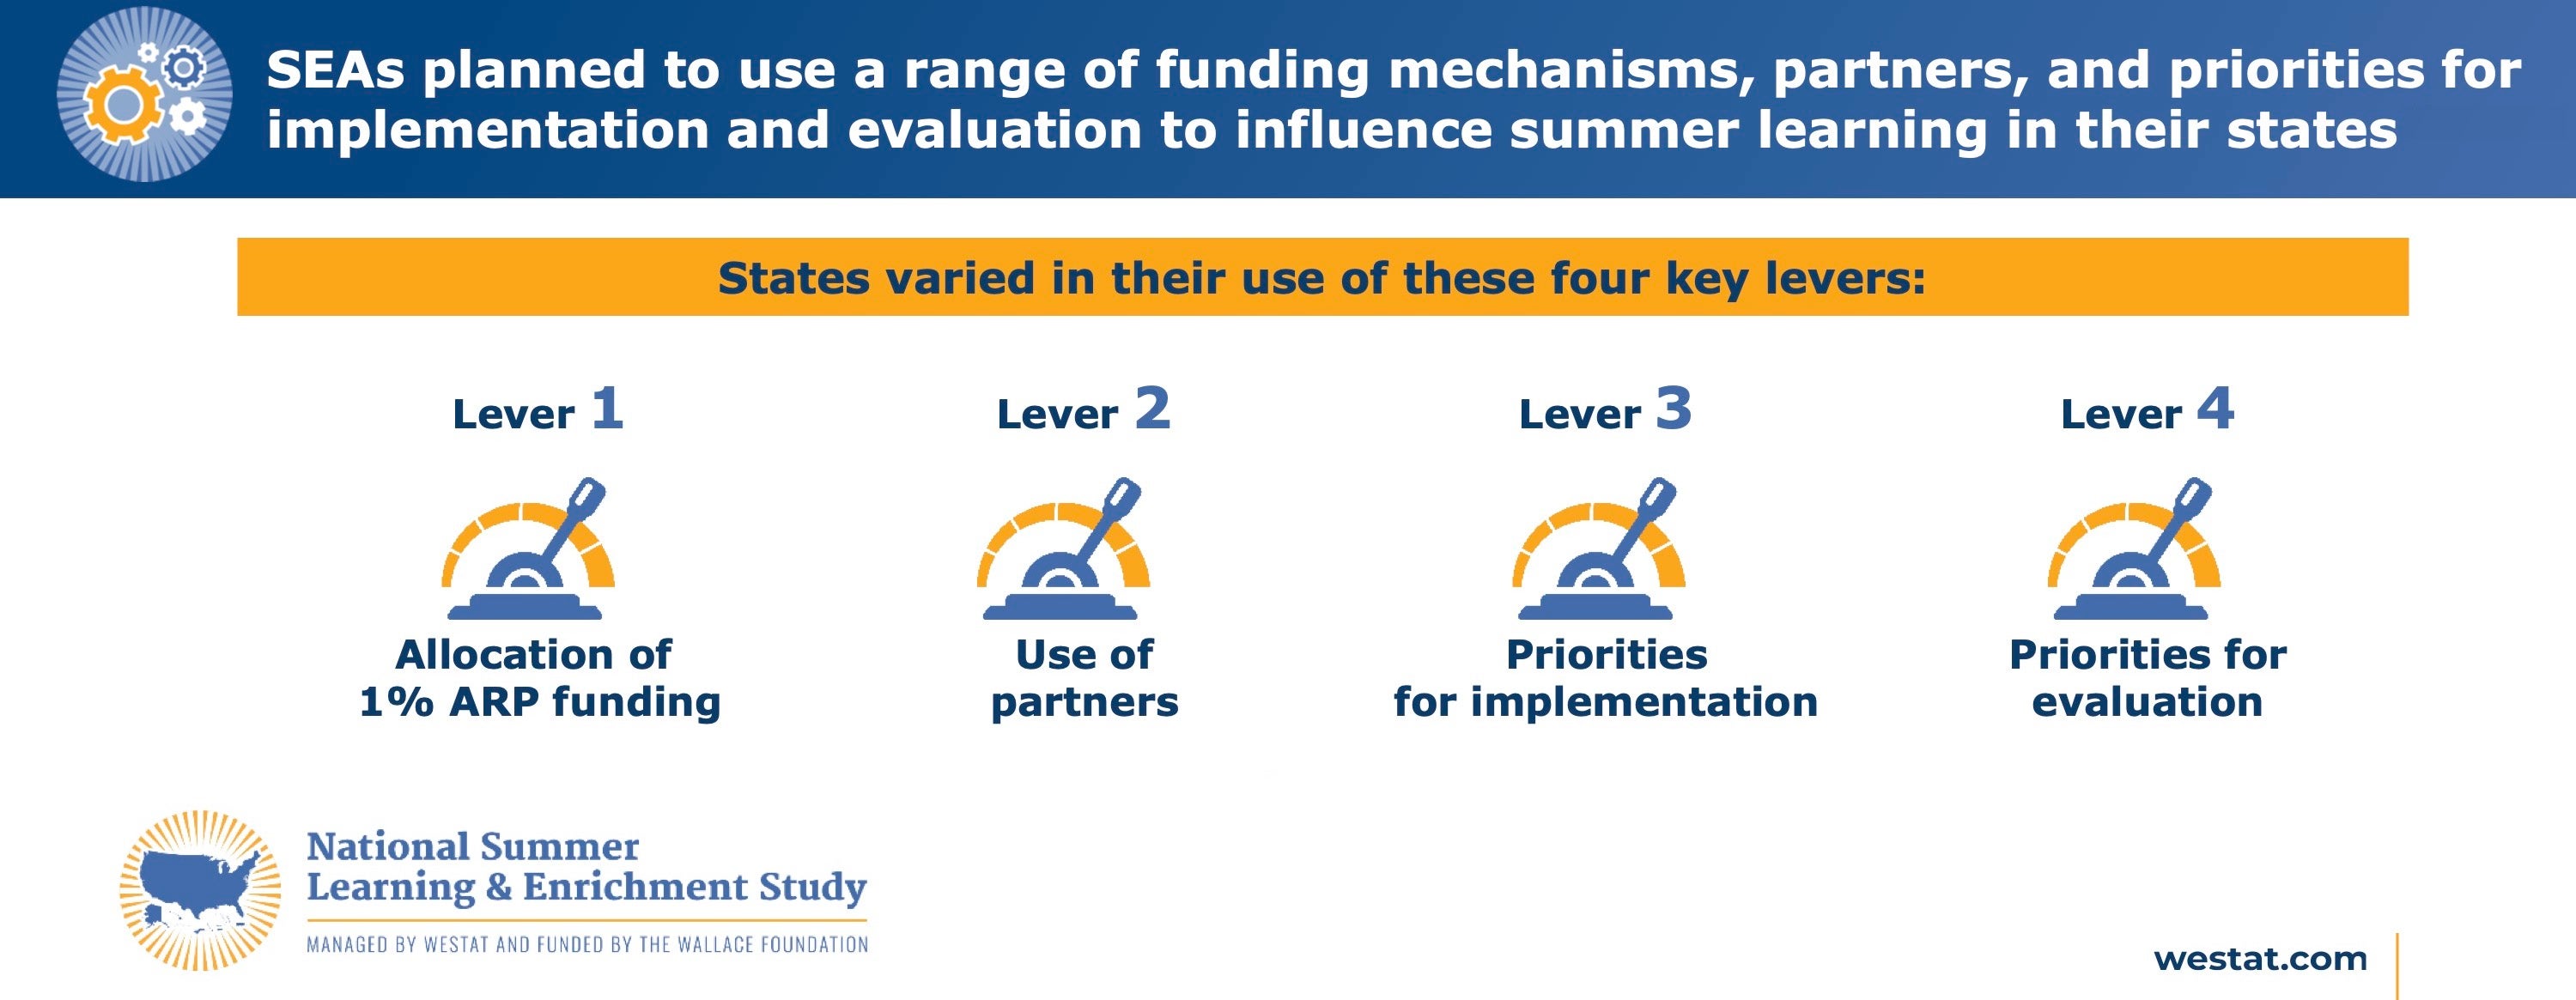 SEAs planned to use a range of funding mechanisms, partners, and priorities for implementation and evaluation to influence summer learning in their states